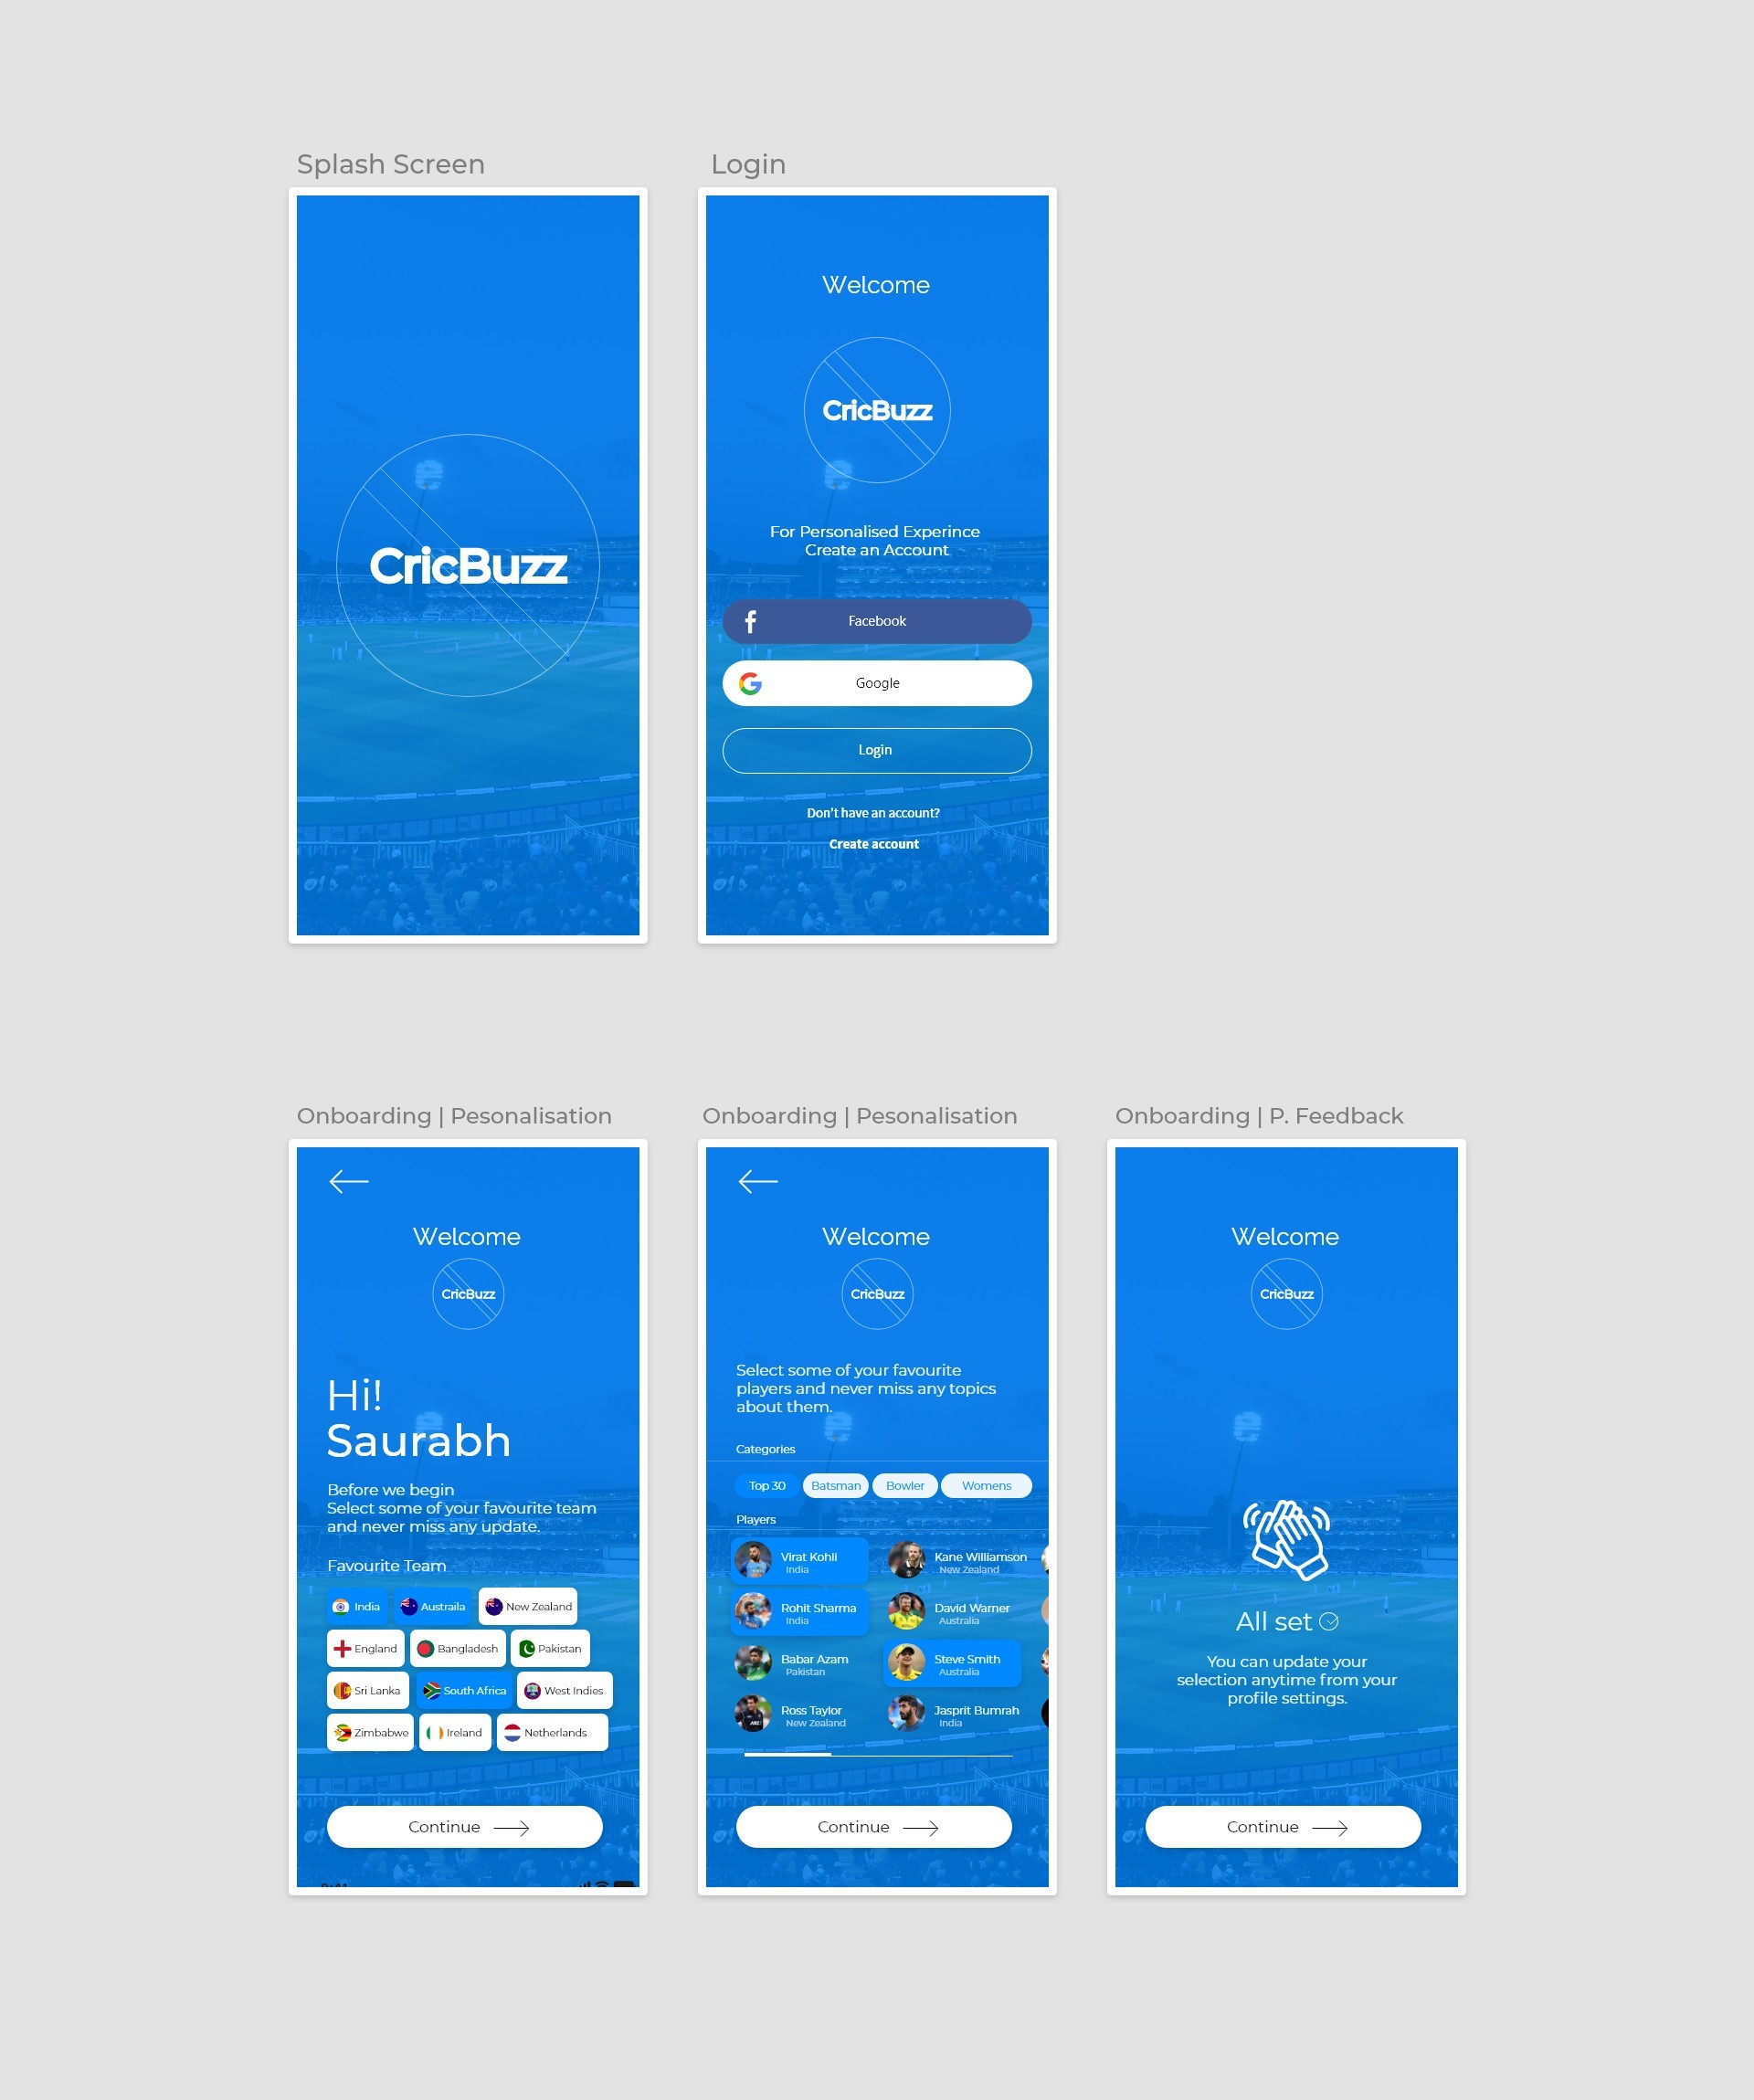 cricbuzz app redesign onboarding experience screen